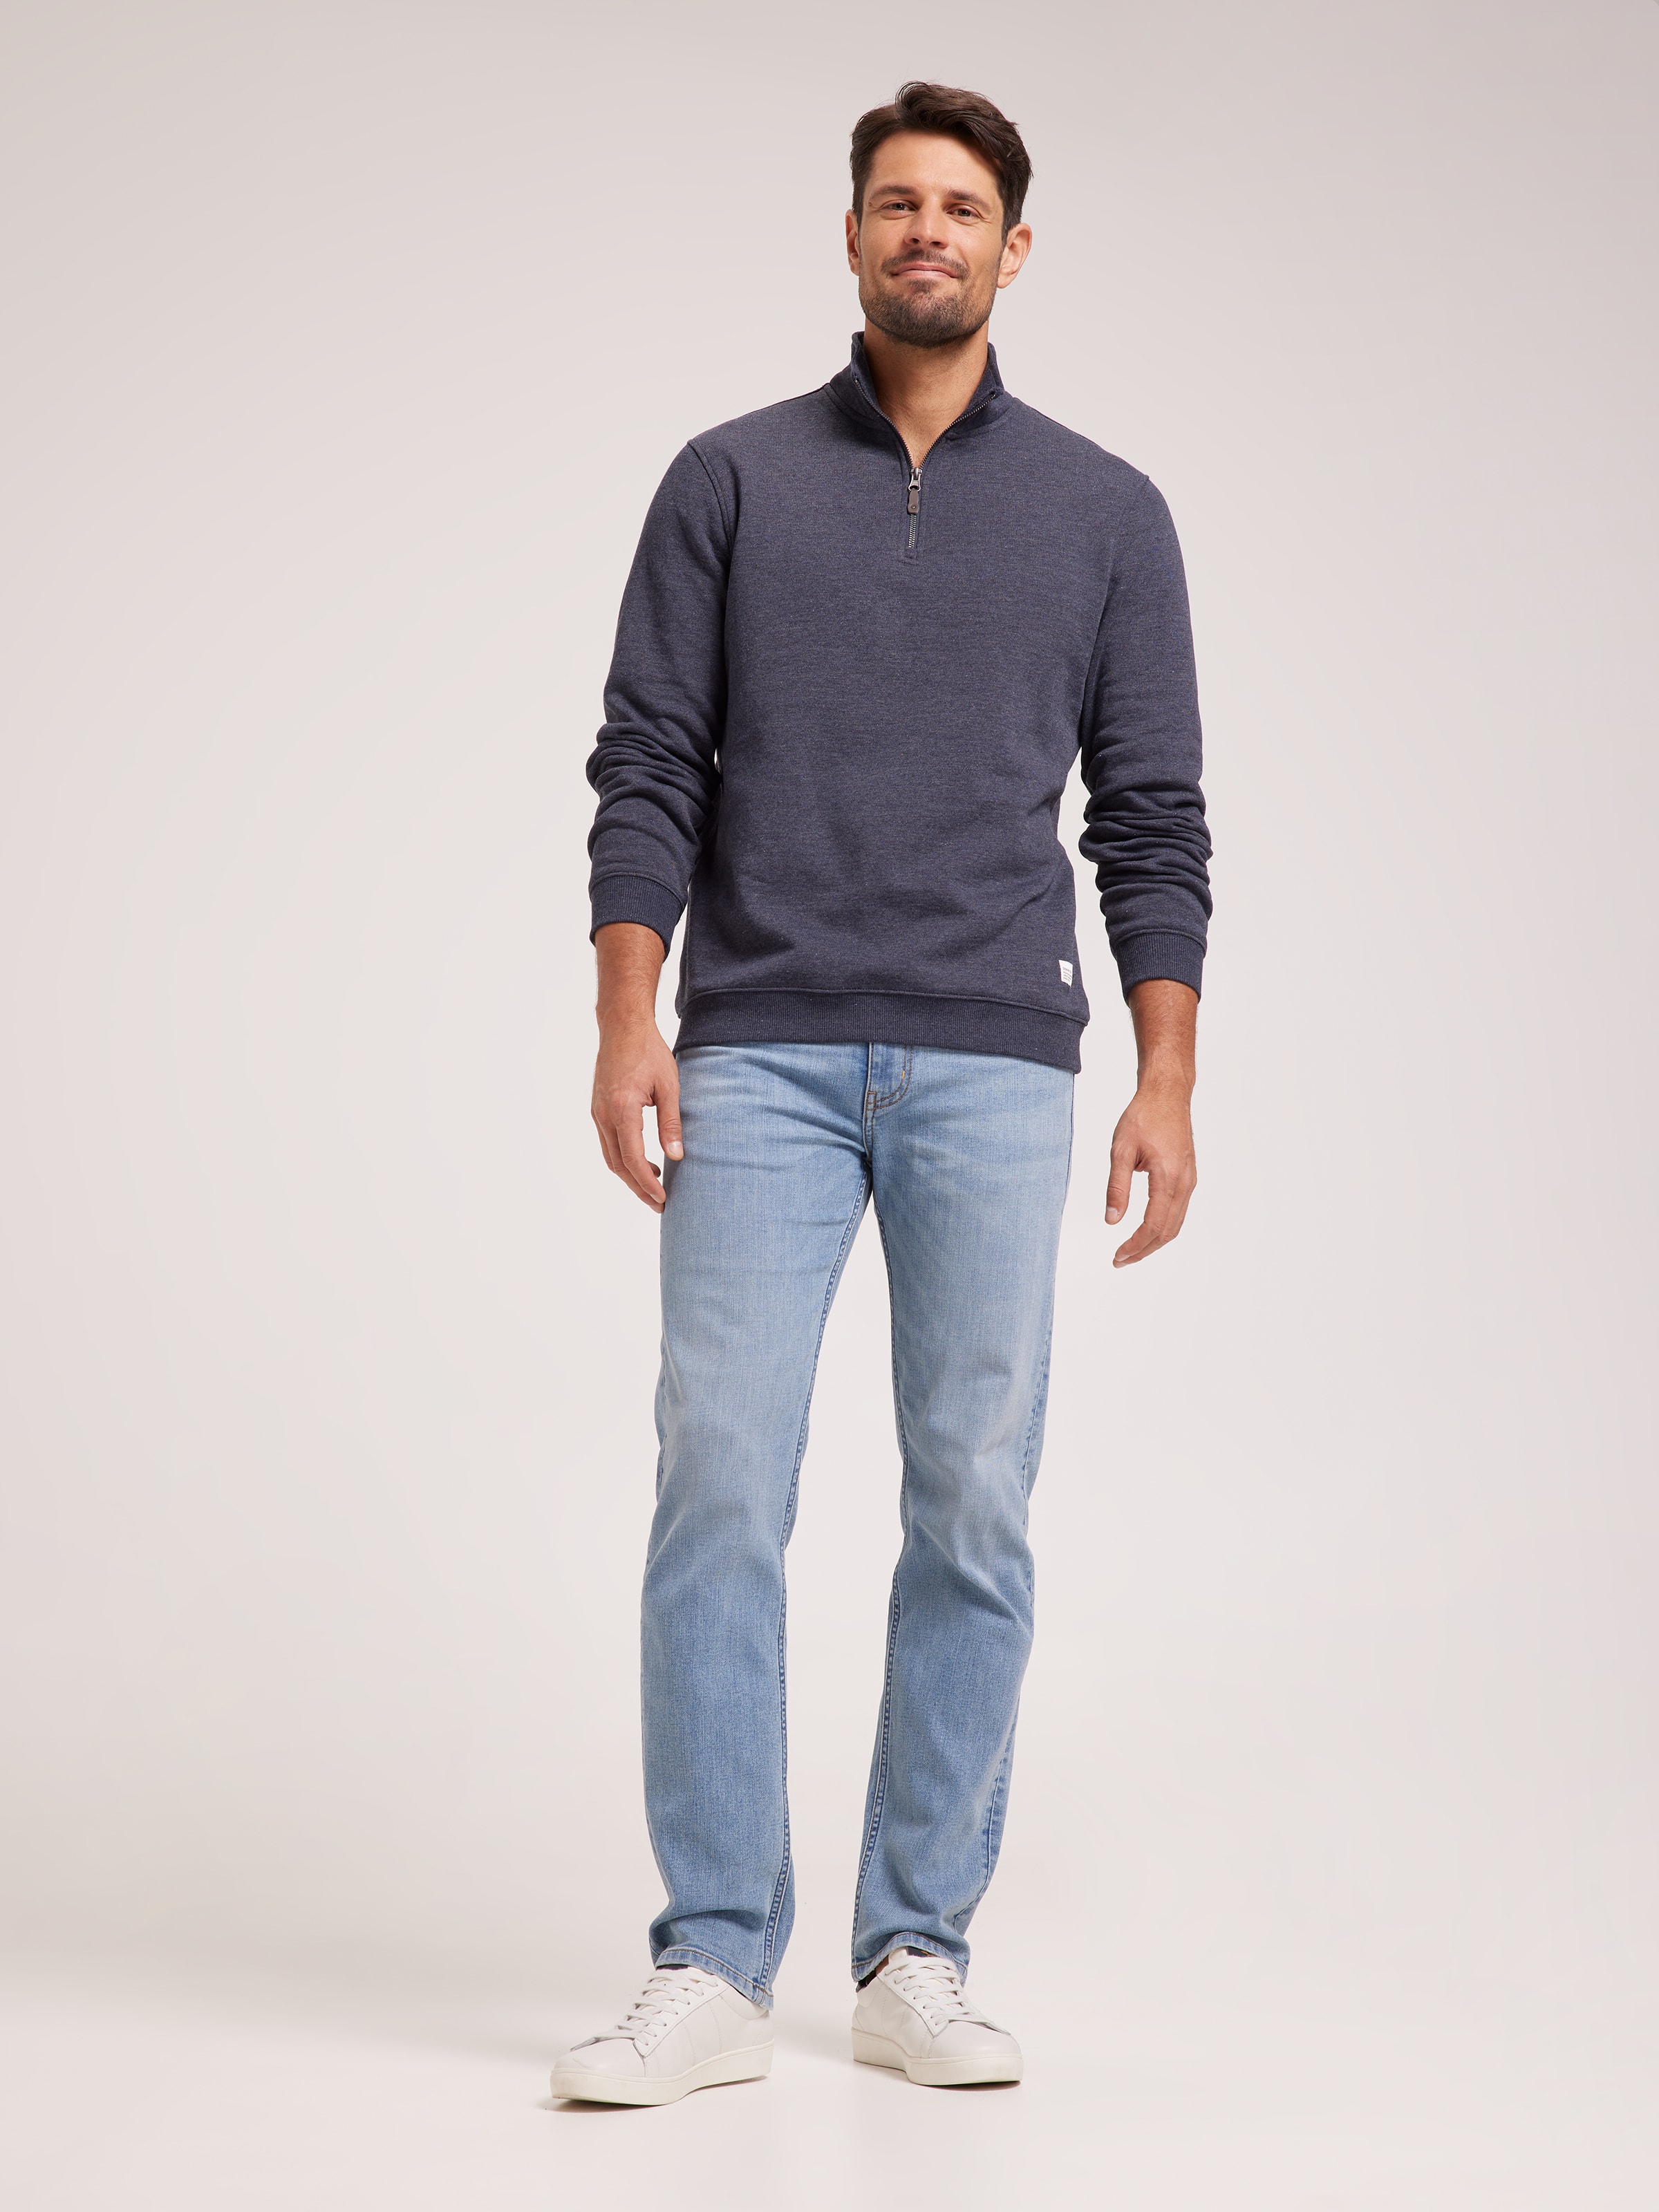 Mens Cropped Jeans, Denim Jeans Online NZ, Buy Mens Cropped Jeans  Clothing New Zealand